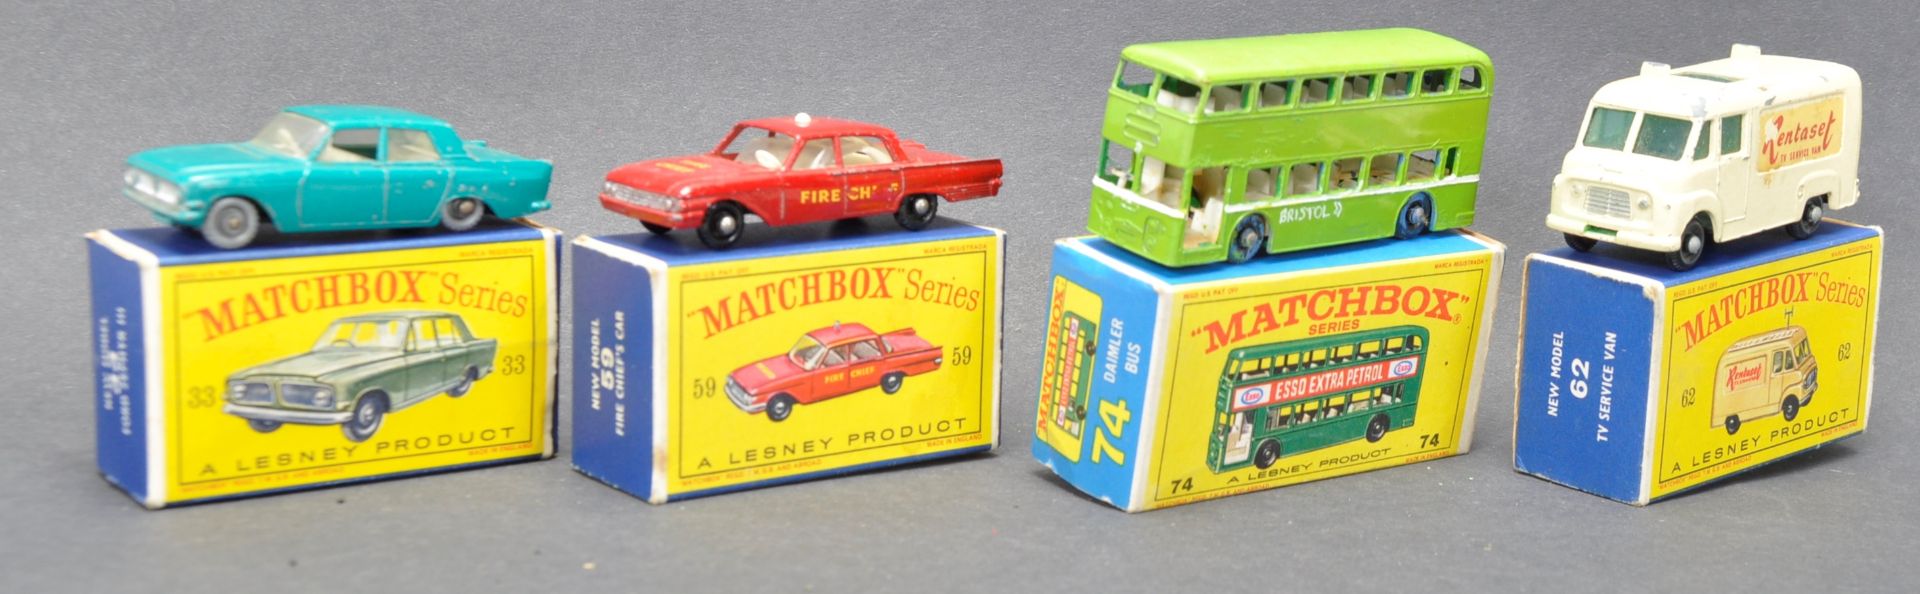 COLLECTION OF VINTAGE LESNEY MATCHBOX DIECAST